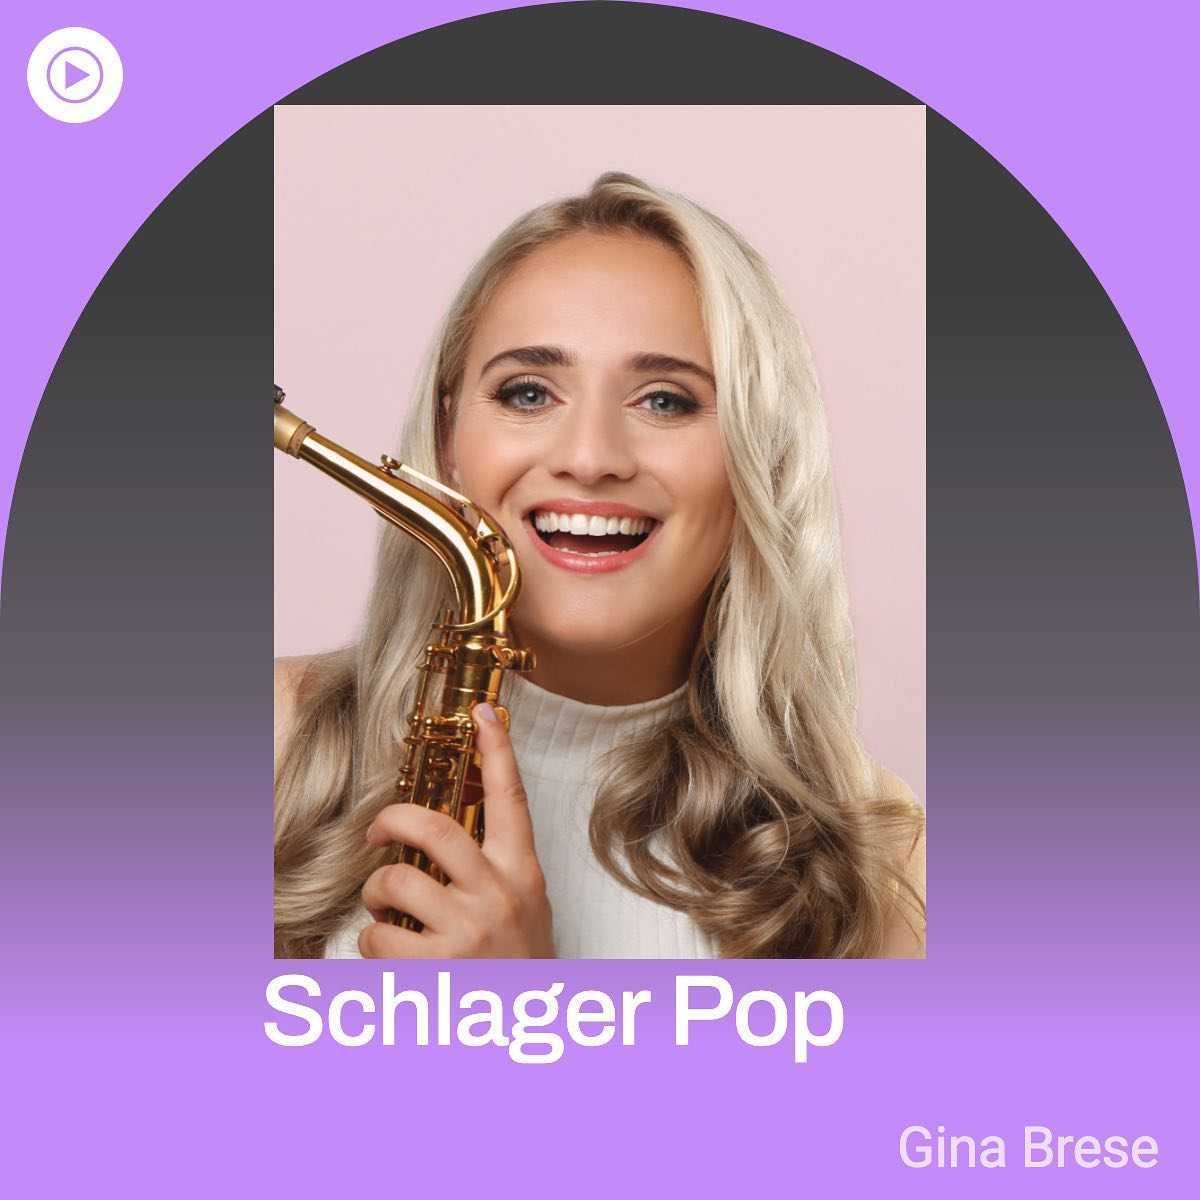 Thanks @youtubemusic for these playlist promotions! 🤩#newmusicfriday #newmusic #newrelease #kontornewmedia #schlager #pop #party #hit #mallefüralle @youtubemusic @gina.brese @peterwackel_official